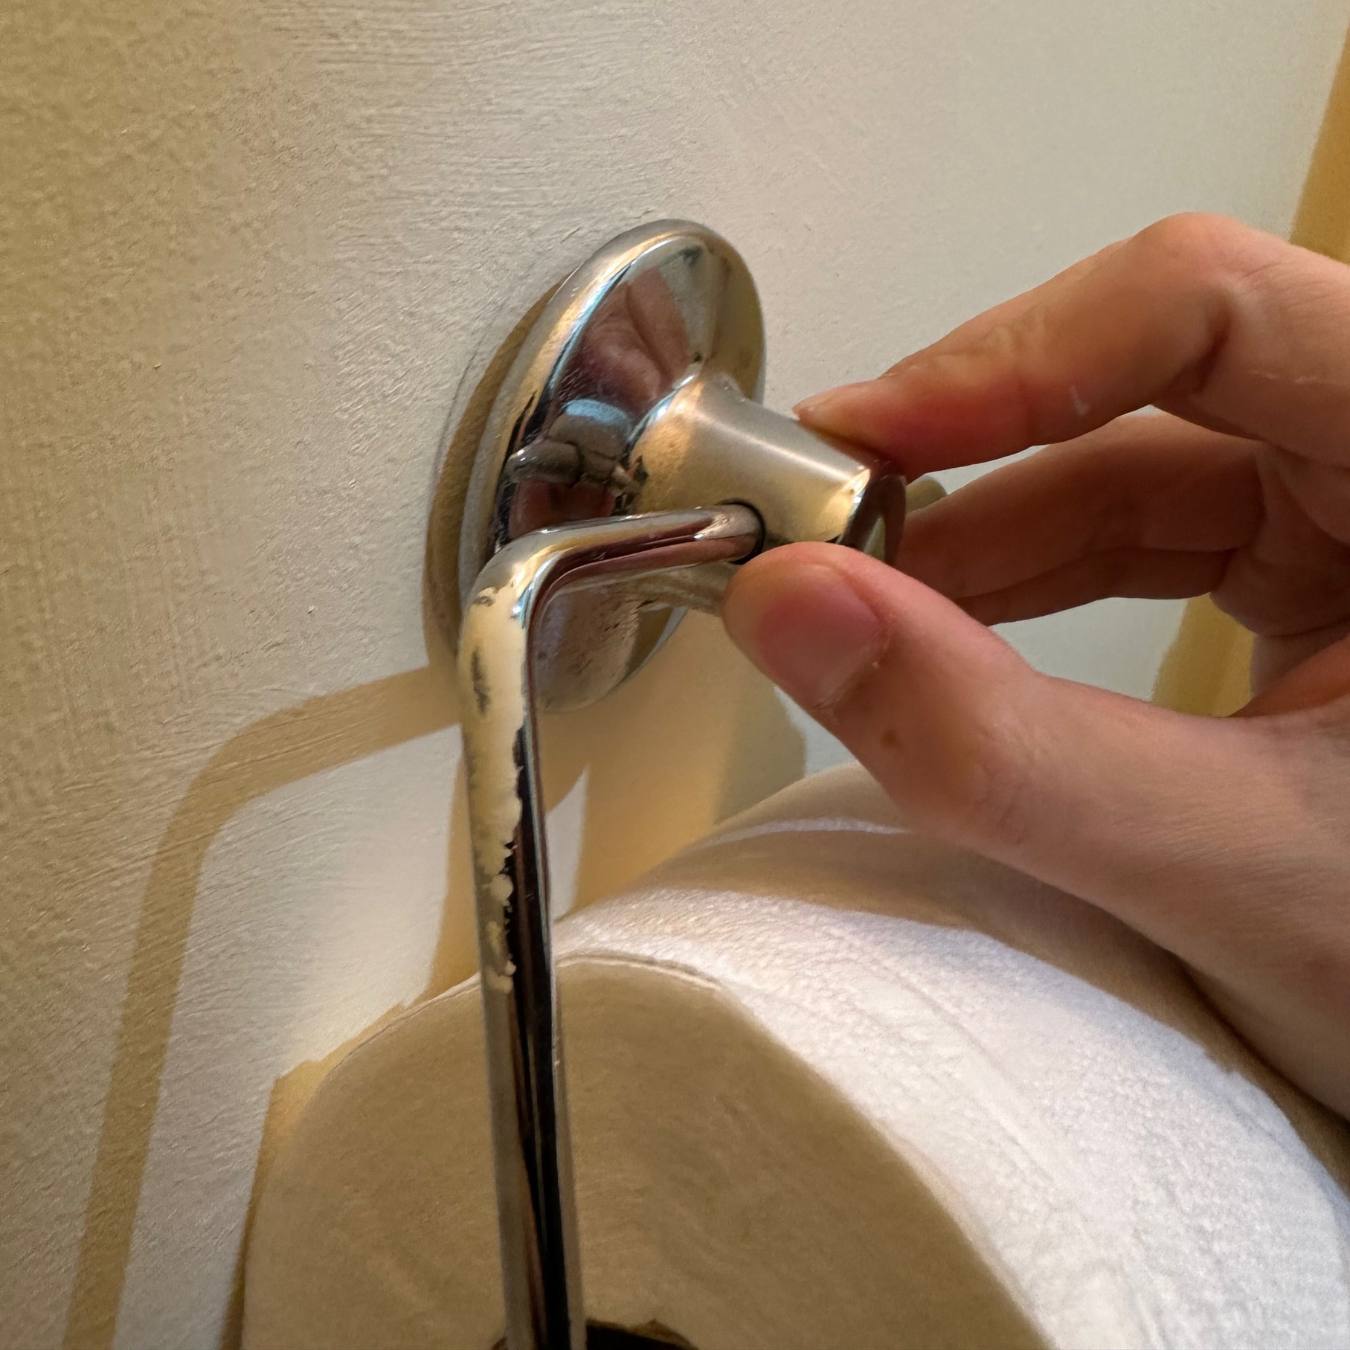 How To Remove Toilet Paper Holder From Wall